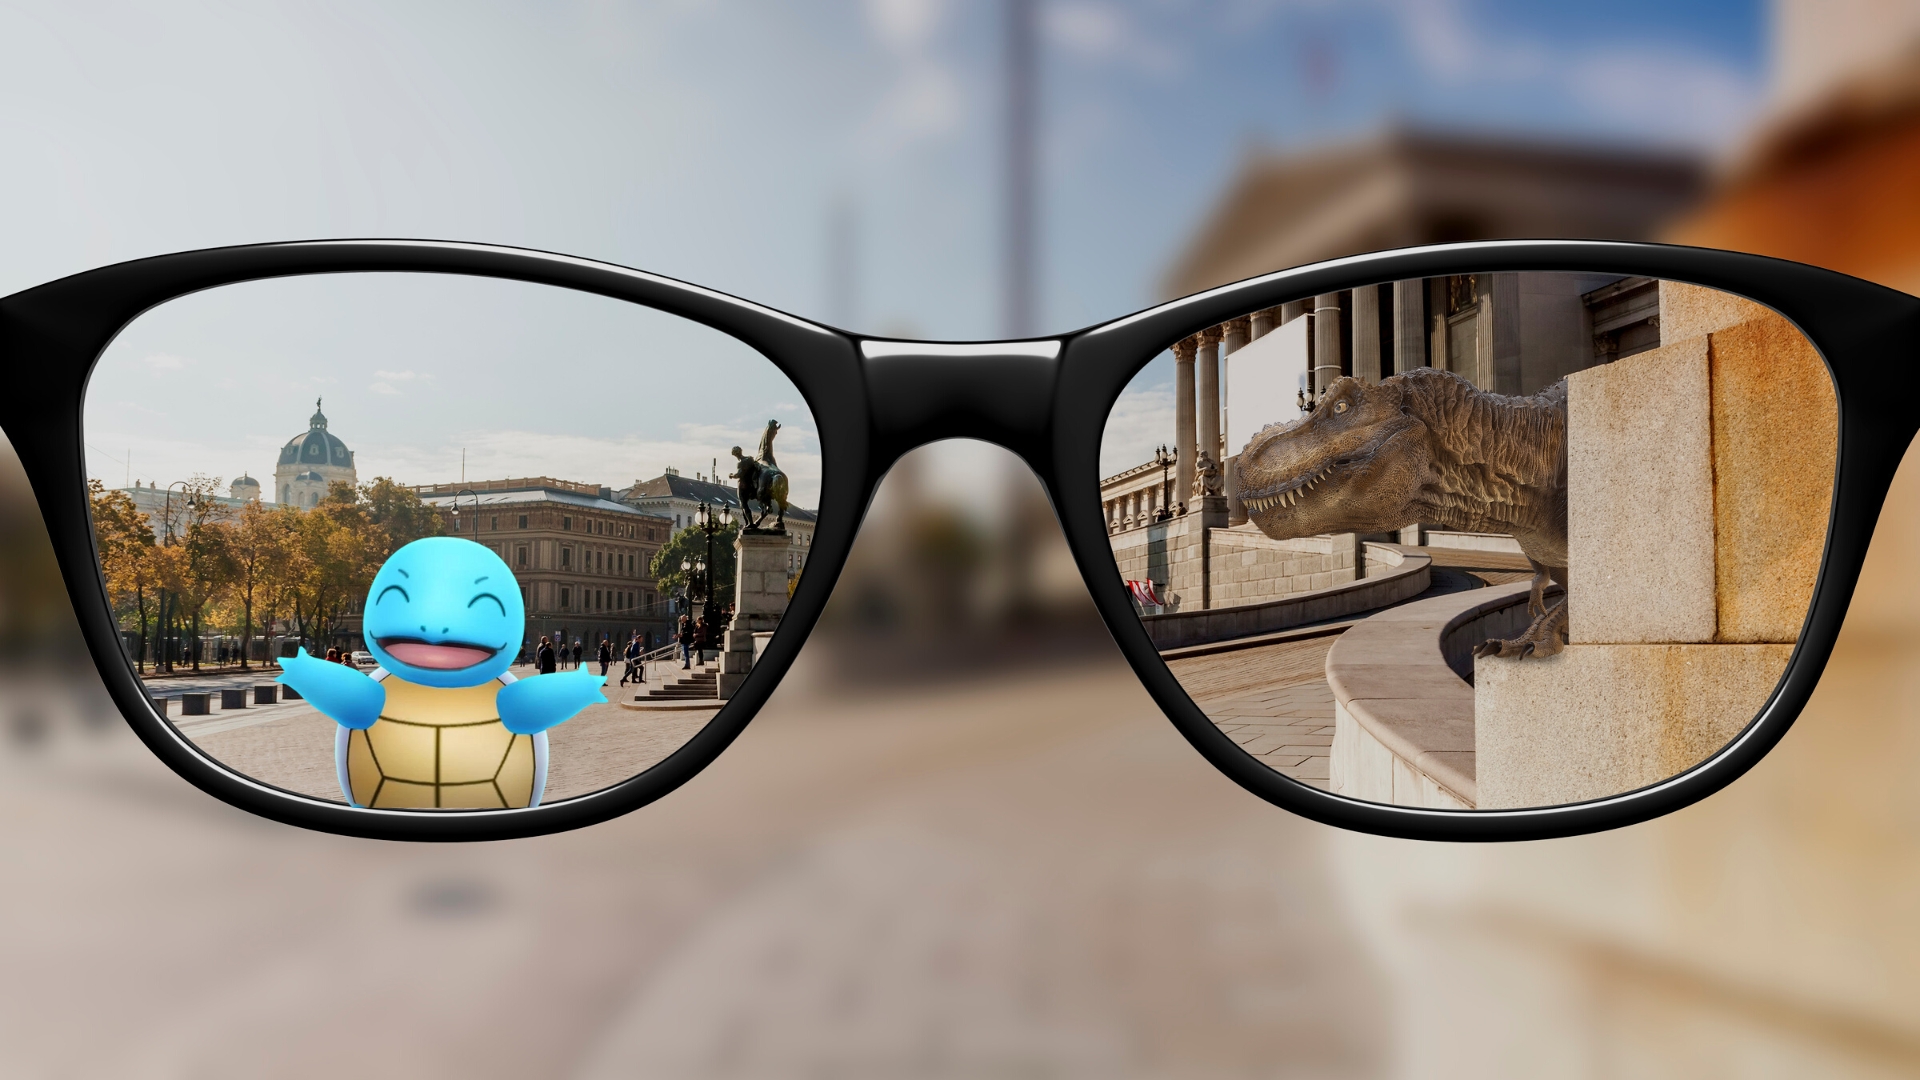 Mixed reality depictions of Pokemon Go's Squirtle and Tyrannosaurus Rex